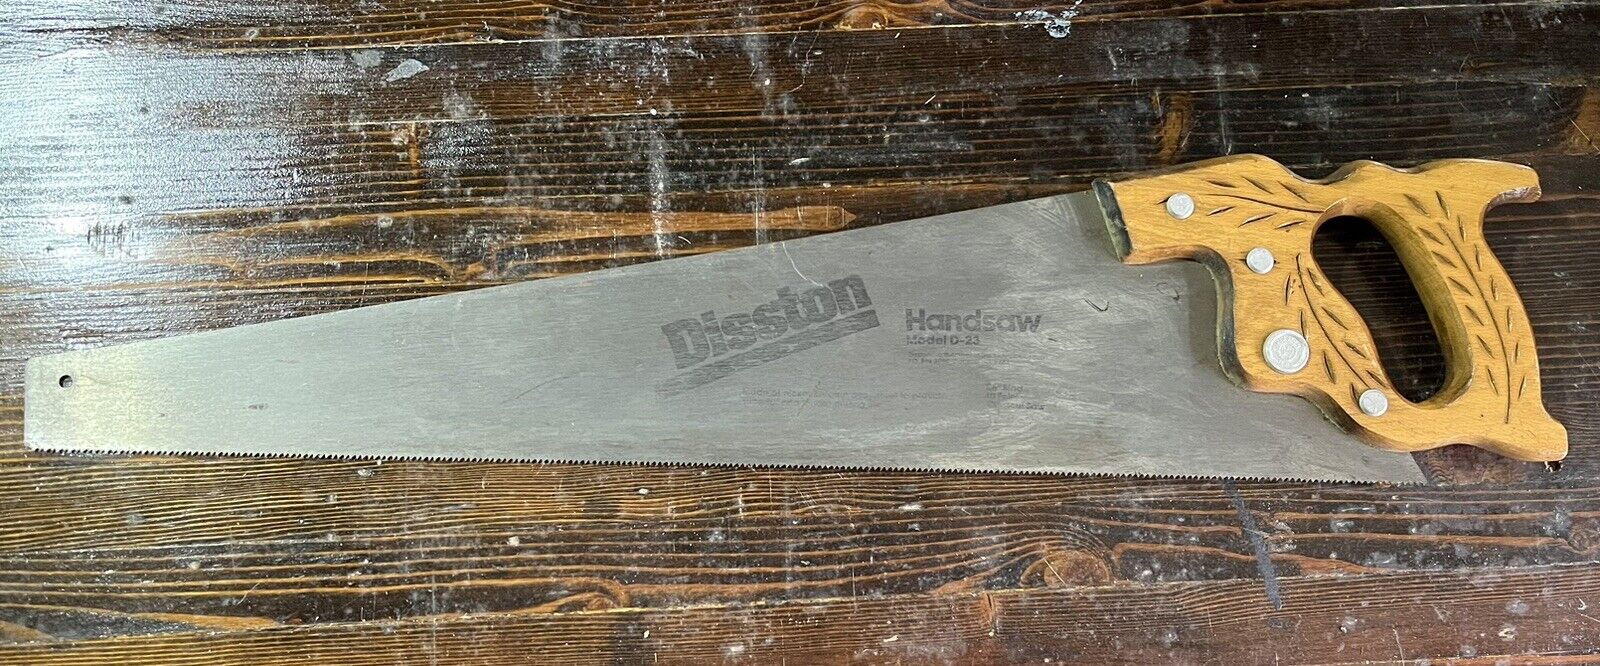 Vintage Disston Crosscut Handsaw | Model D-23 | 26” Blade 10 Point | Made in USA